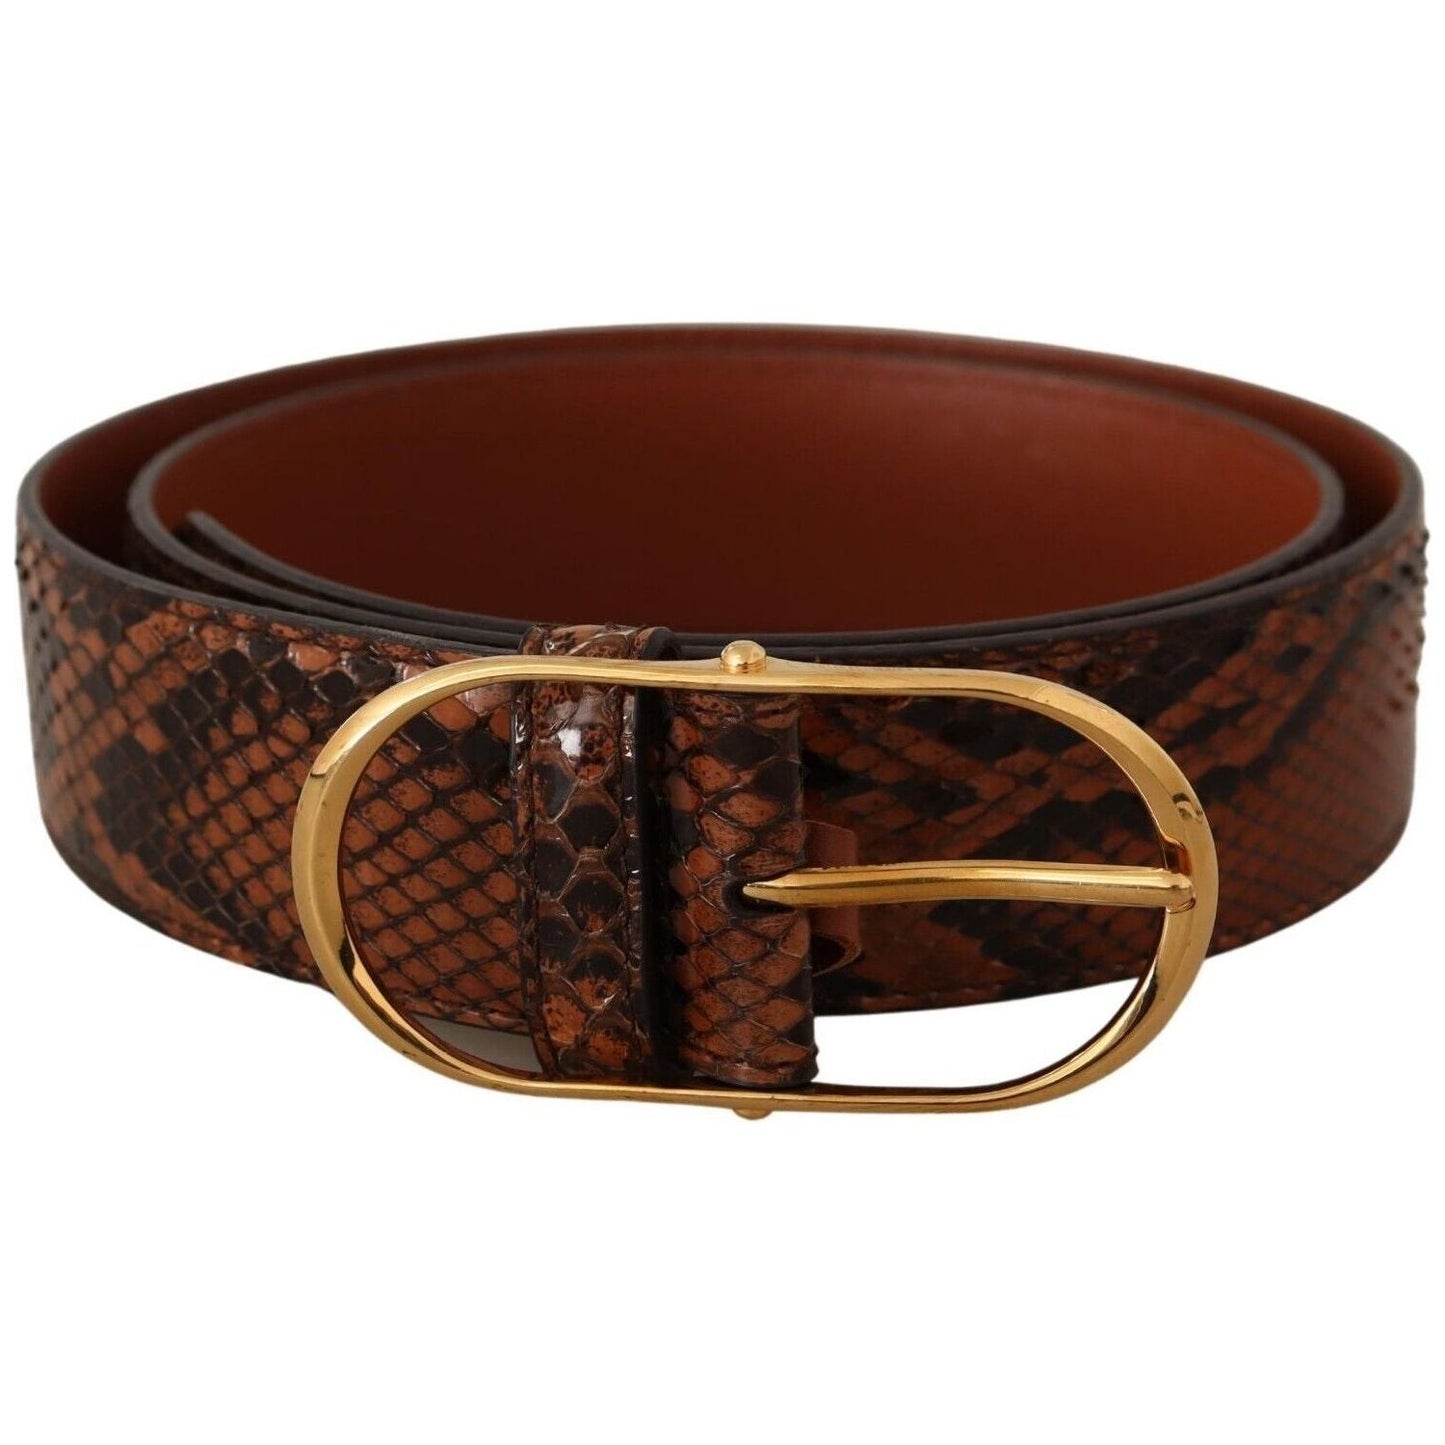 Dolce & Gabbana Elegant Leather Belt with Gold Buckle brown-exotic-leather-gold-oval-buckle-belt-7 s-l1600-2-283-8be1791a-ff8.jpg